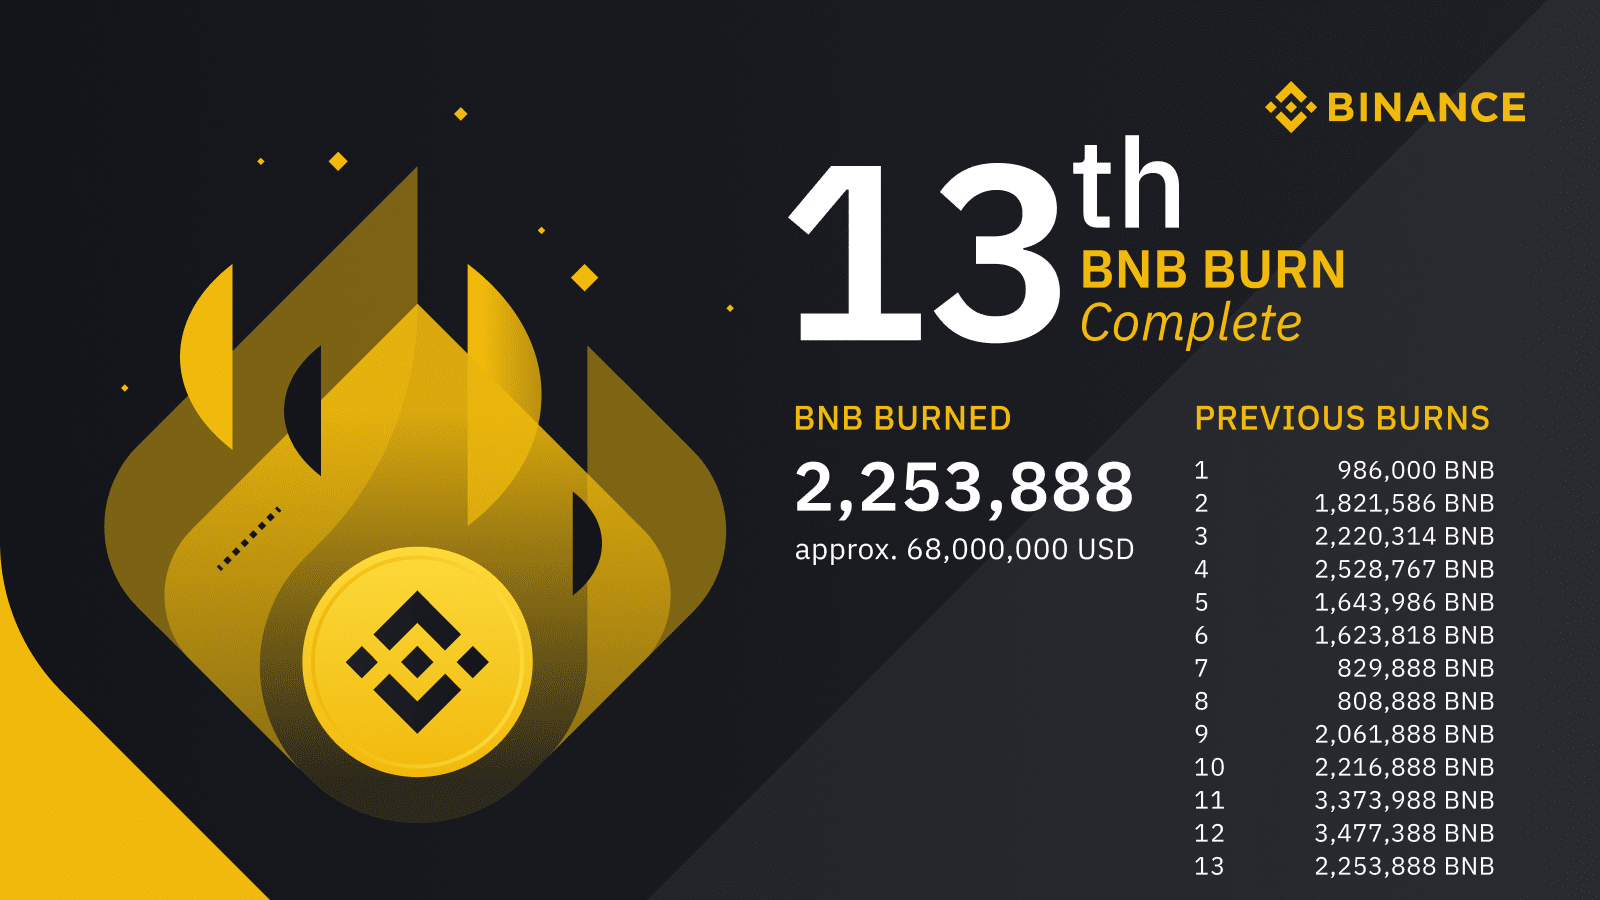 002_big_this_trade_always_play_out_binance_burn_coin_14th_cryptoxicate_com.png